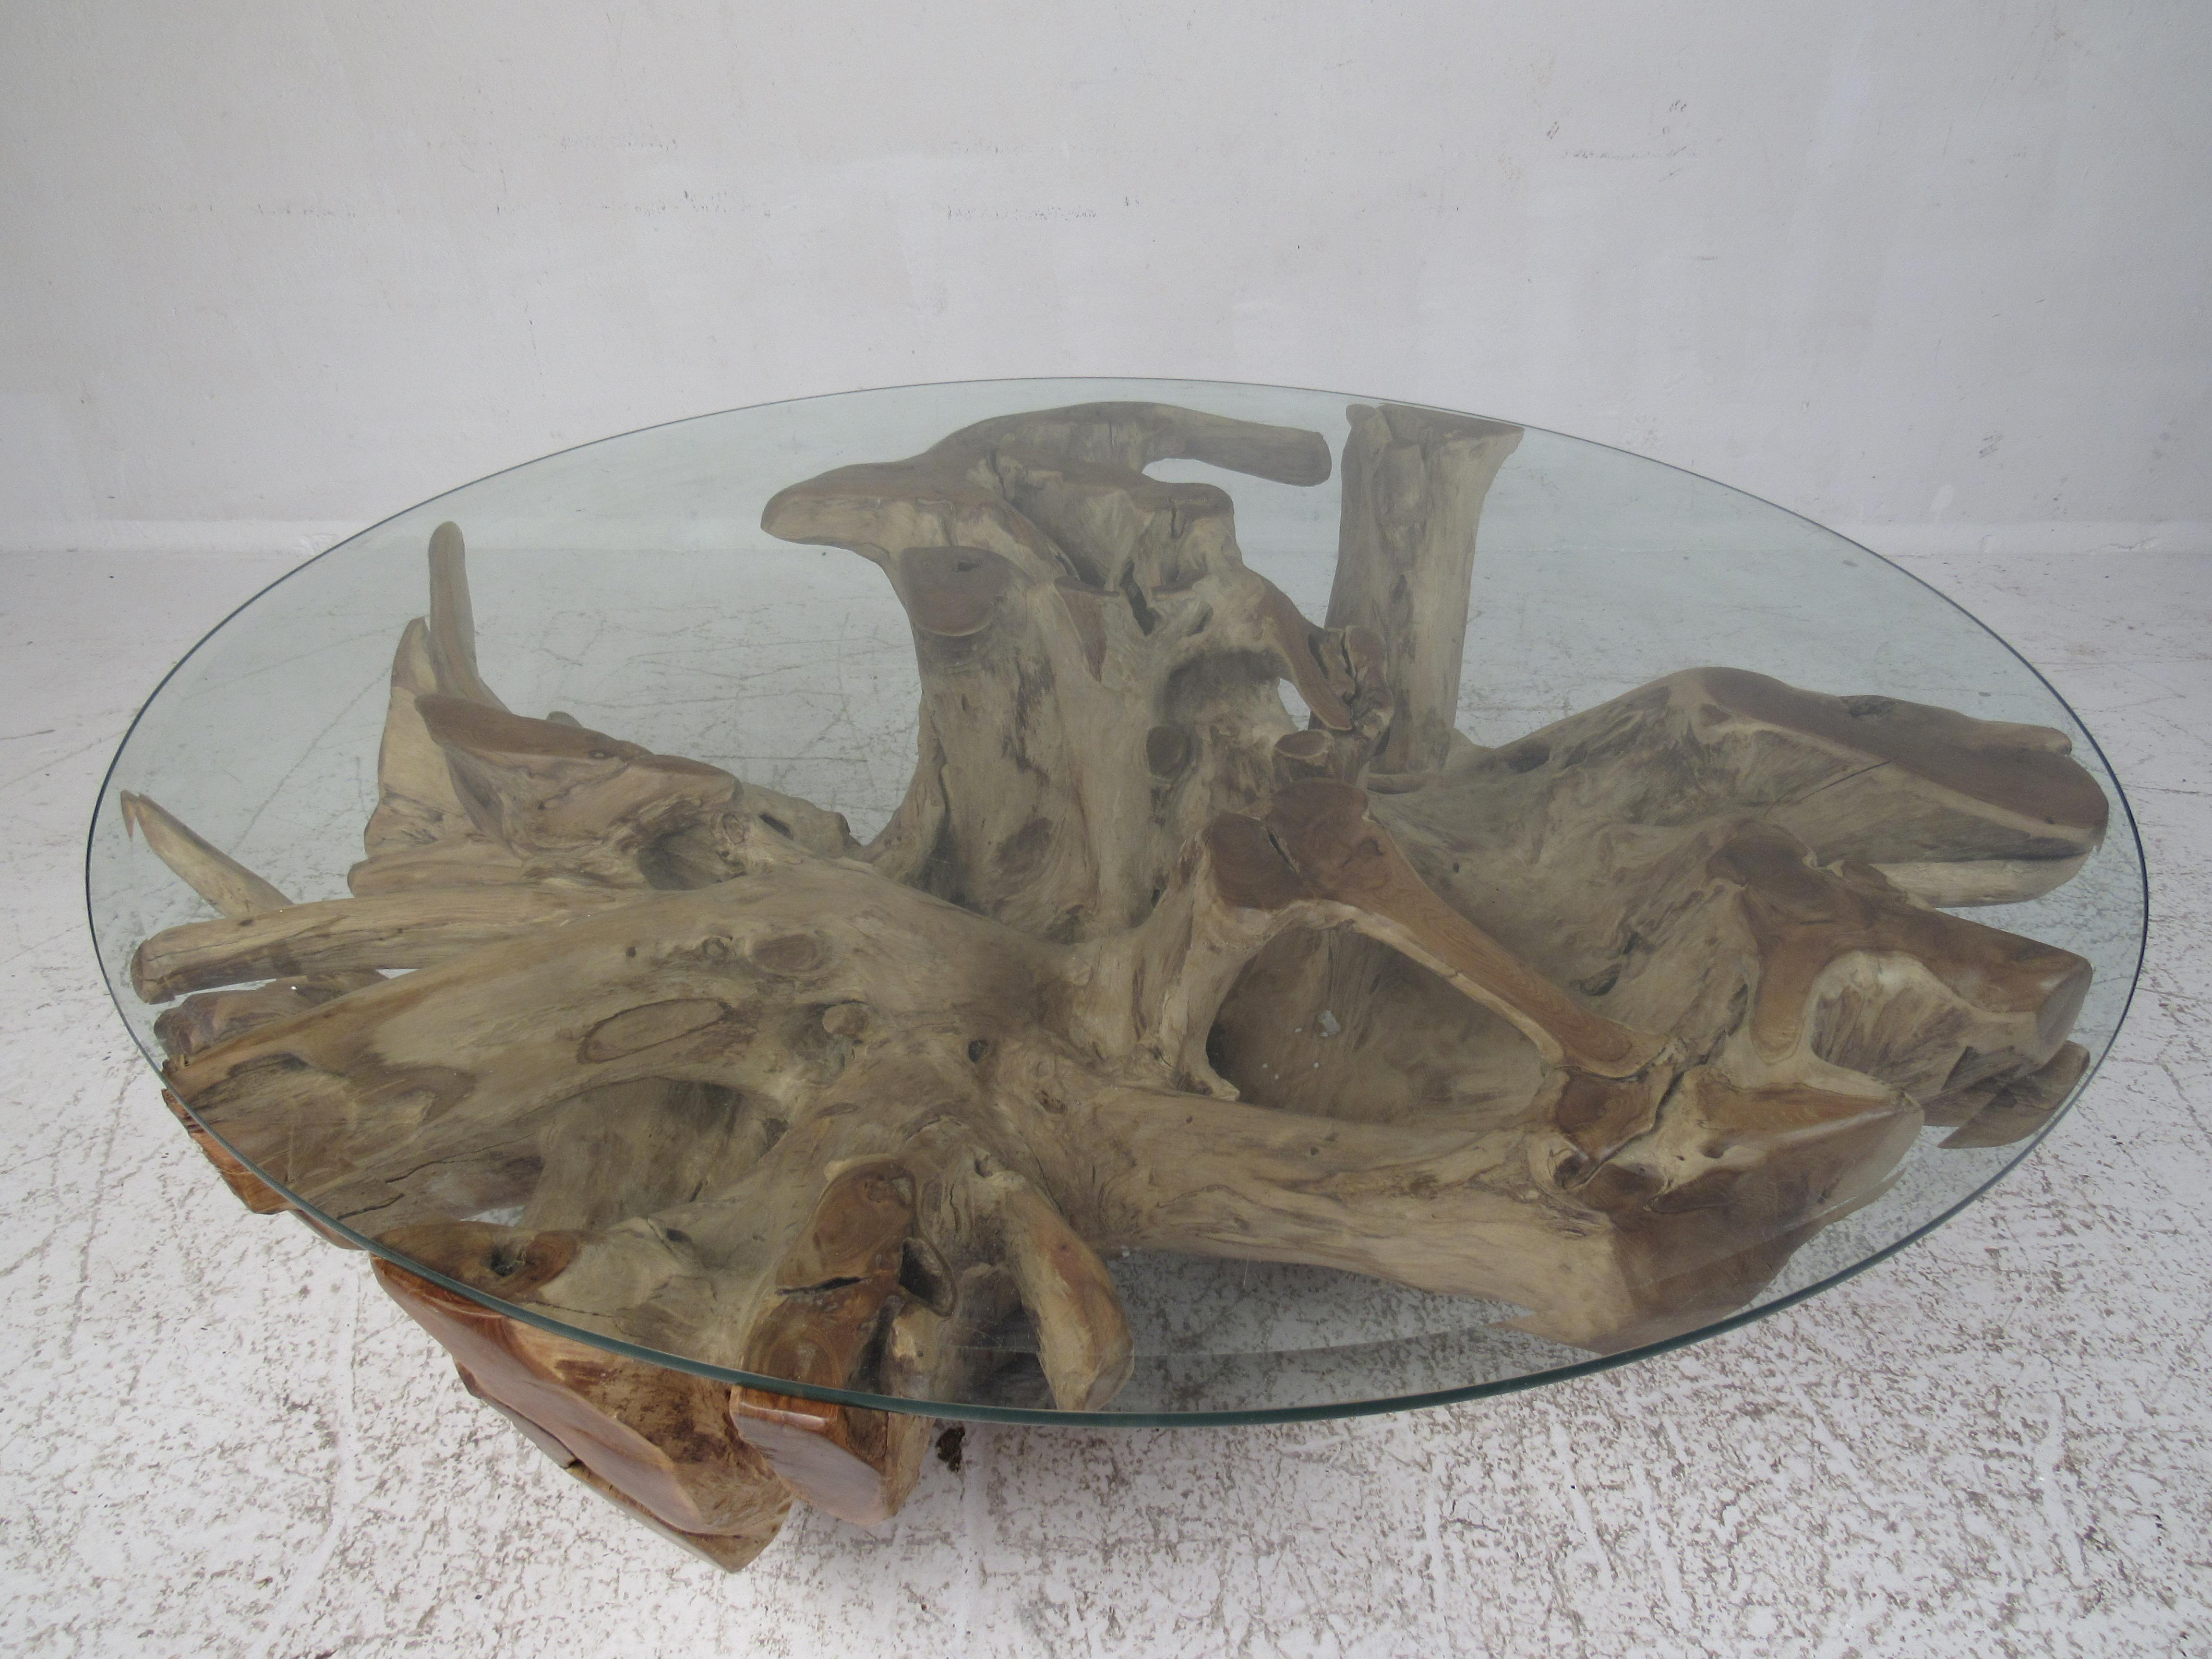 This beautiful vintage coffee table features an extremely heavy tree root base and a circular glass top with beveled edges. A real live edge wood coffee table that is sure to make an impression on any guest. An exquisite design that allows the thick